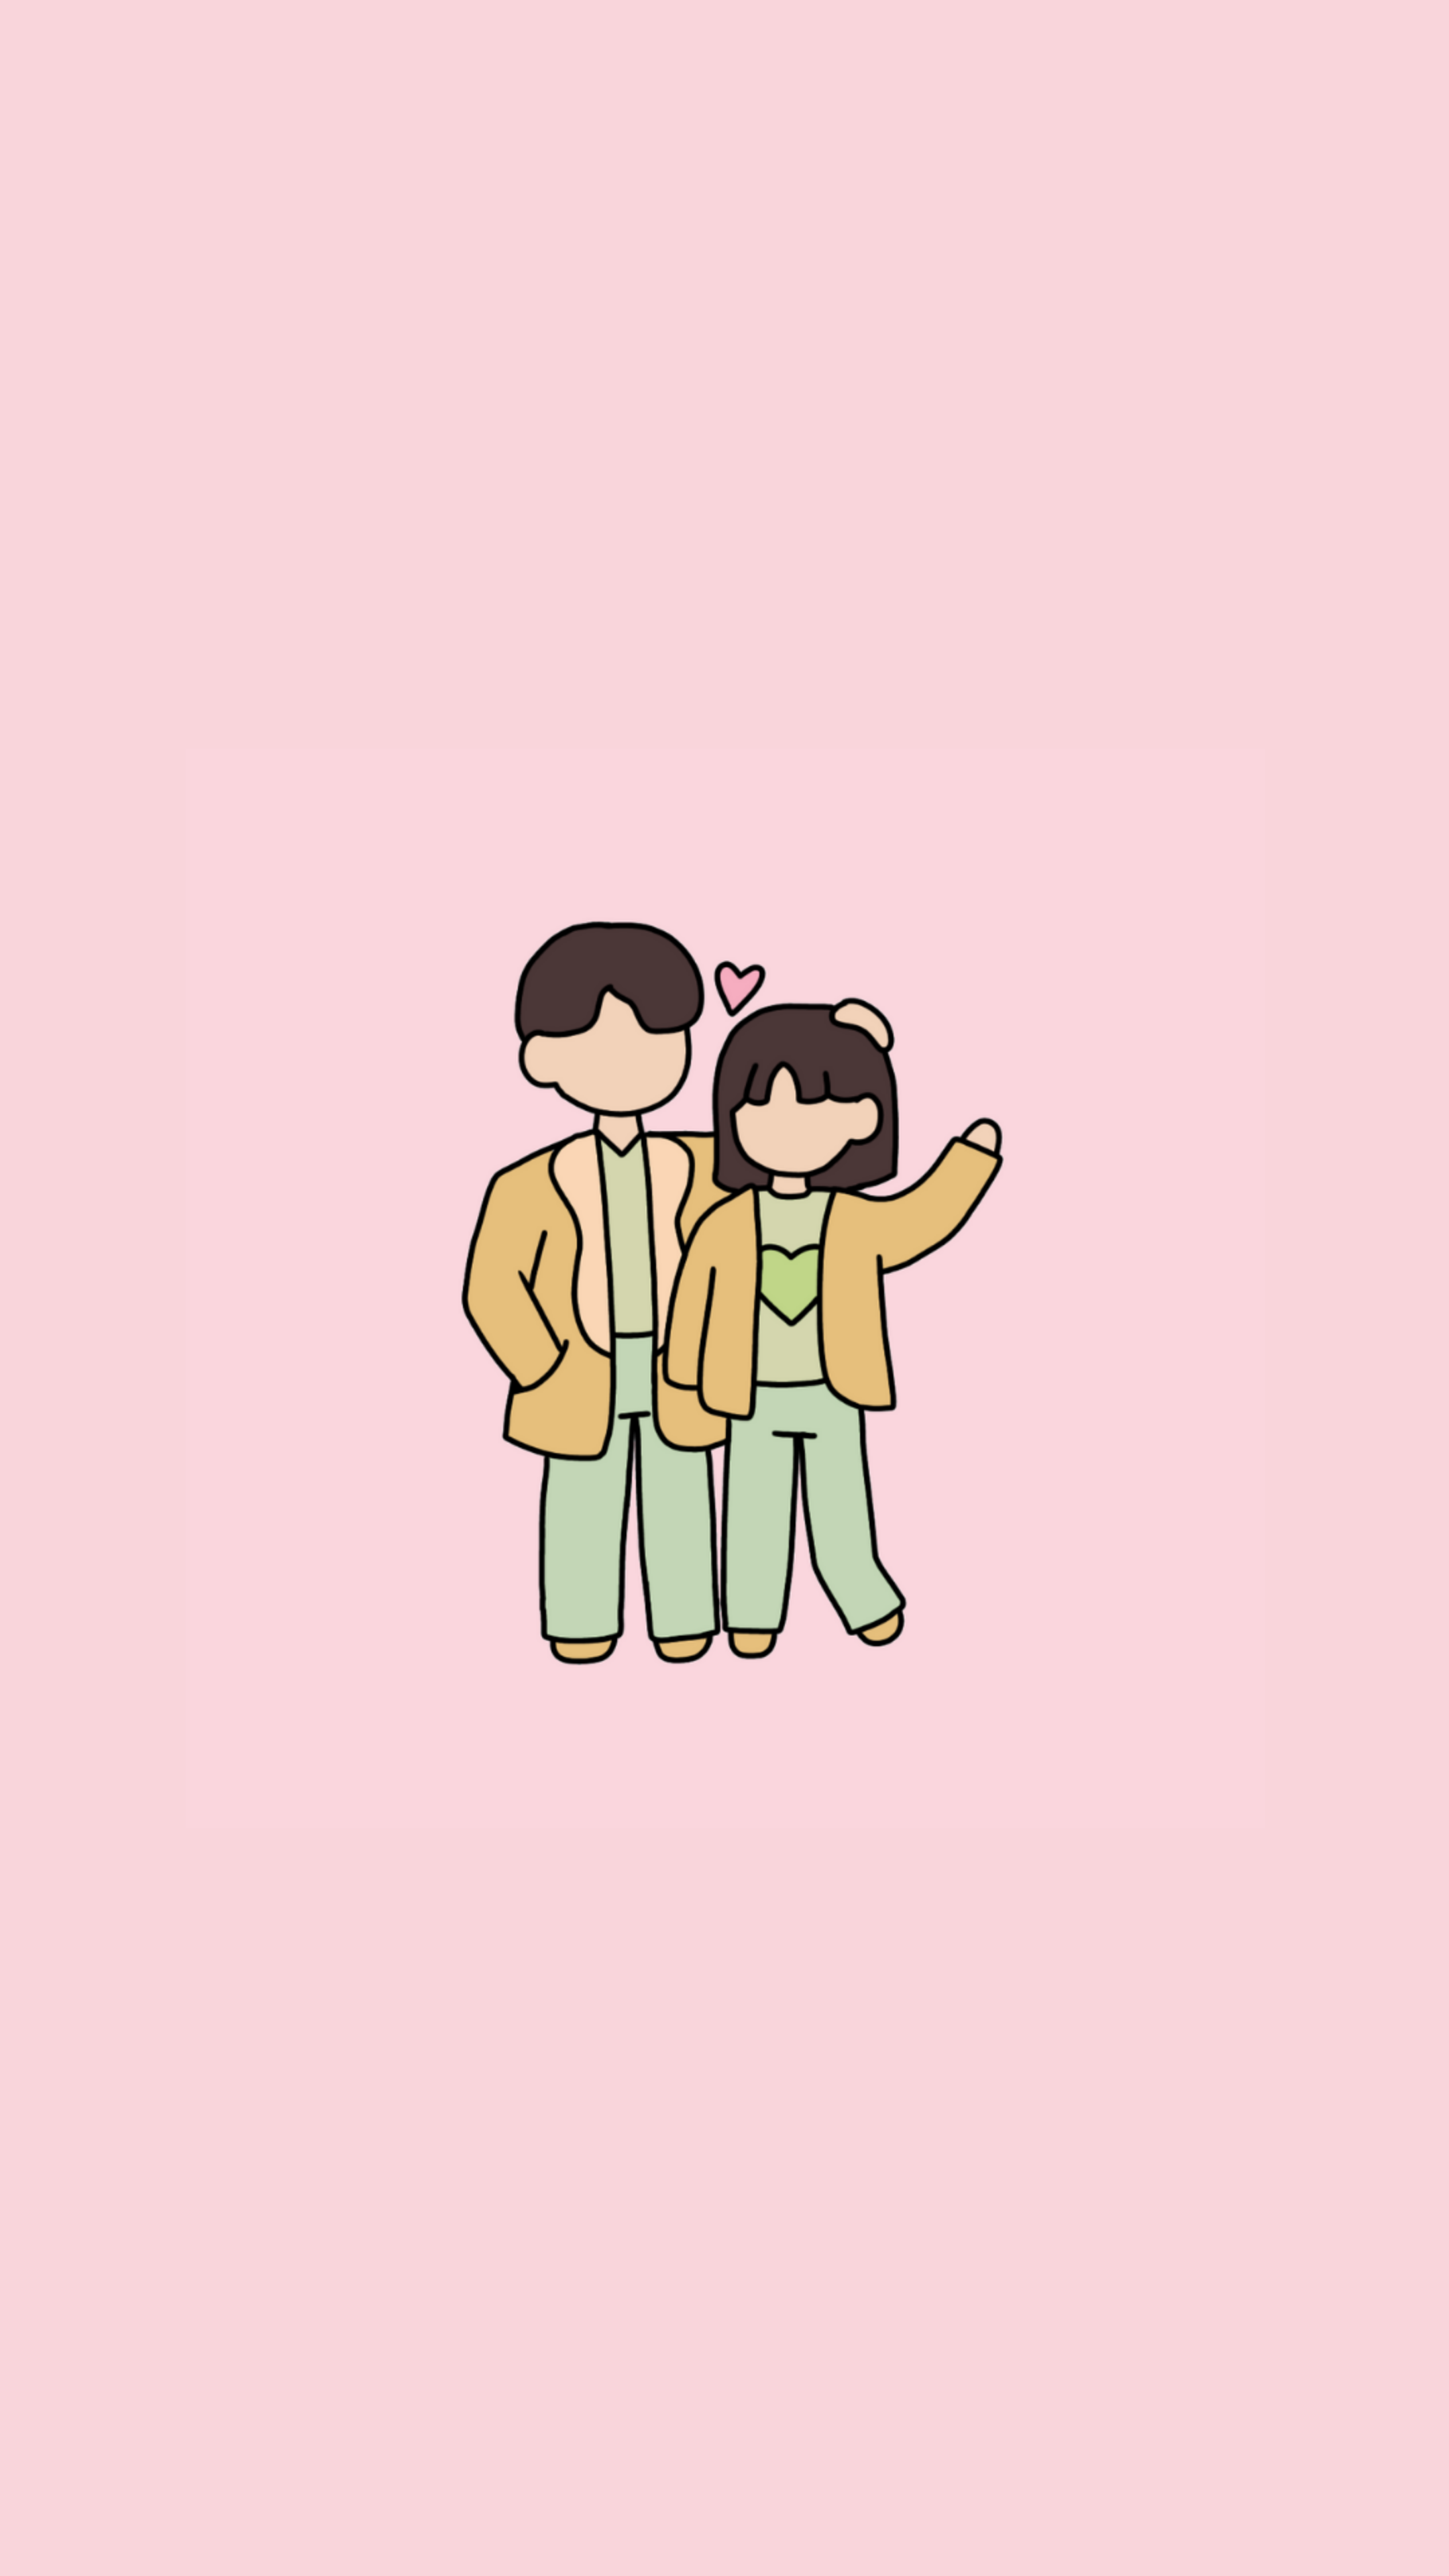 ivoci - Free Download: Cute Couple Illustration Phone Wallpapers - 3